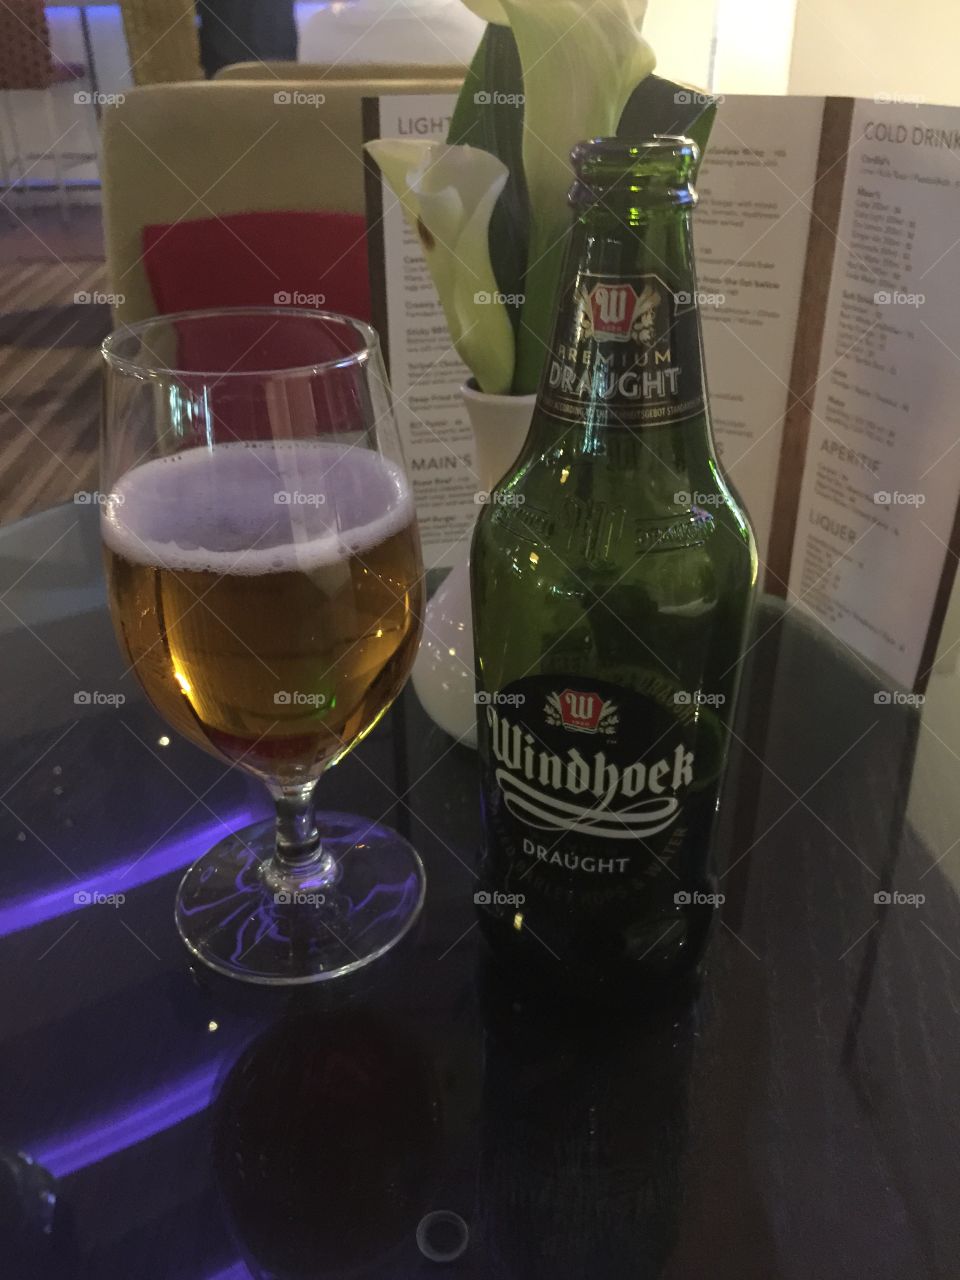 Cheers from South Africa